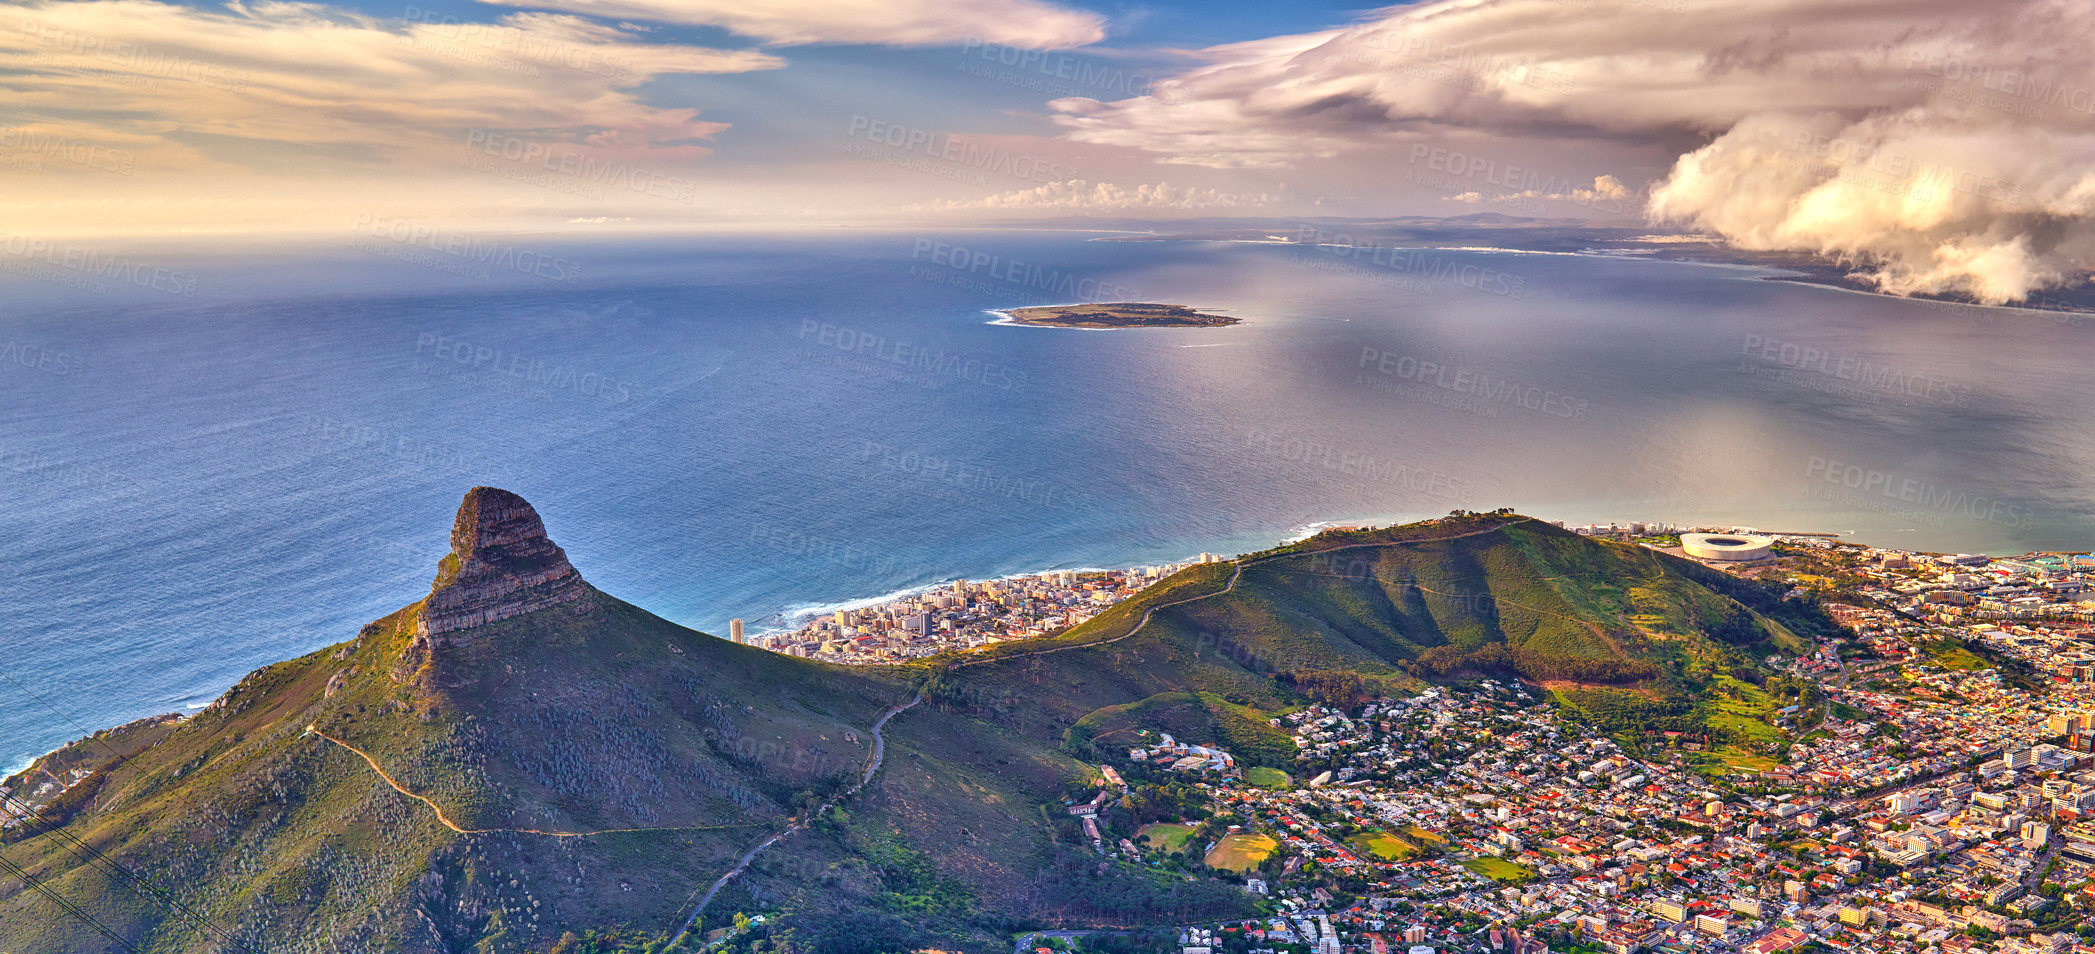 Buy stock photo Aerial view of Lions Head mountain with the ocean and cloudy sky copy space. Beautiful landscape of green mountains with lots of vegetation surrounding an urban city in Cape Town, South Africa